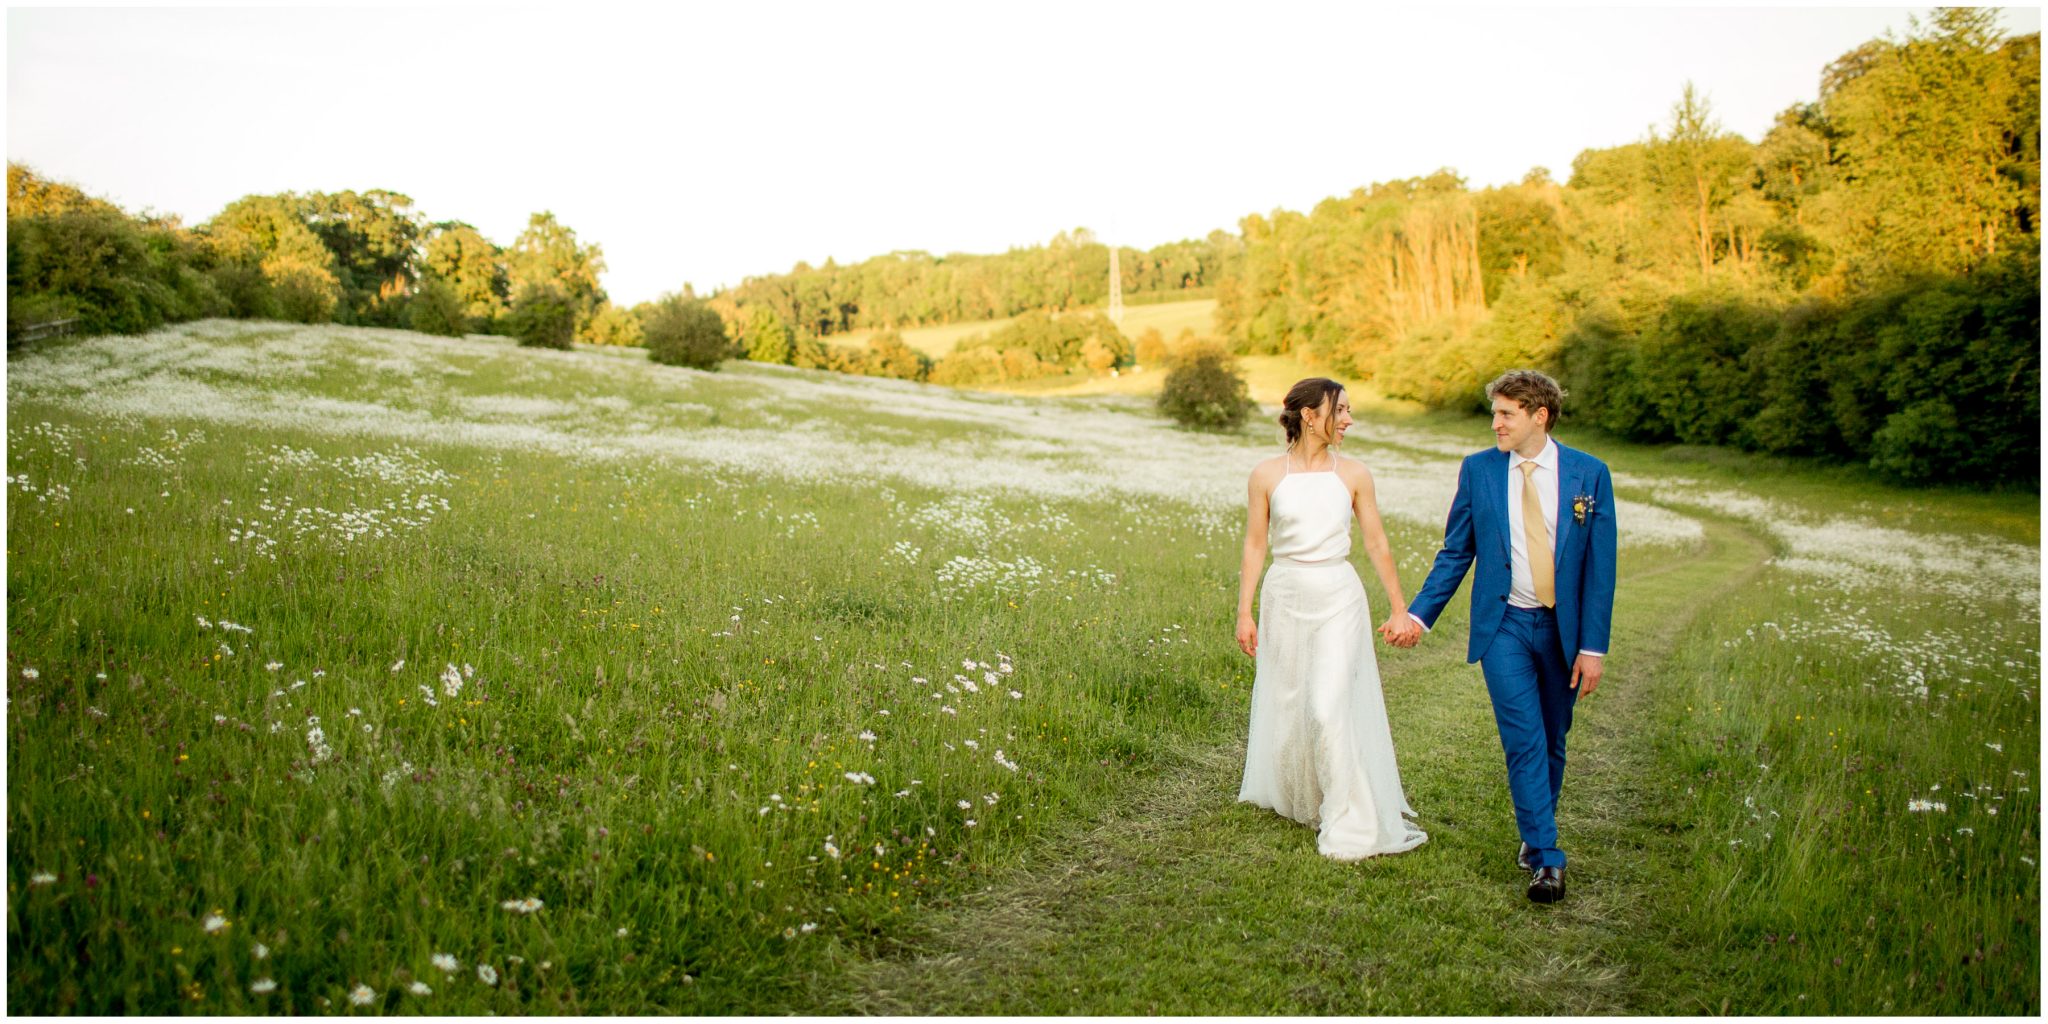 Bride and groom walk hand in hand through the meadow in the evening light